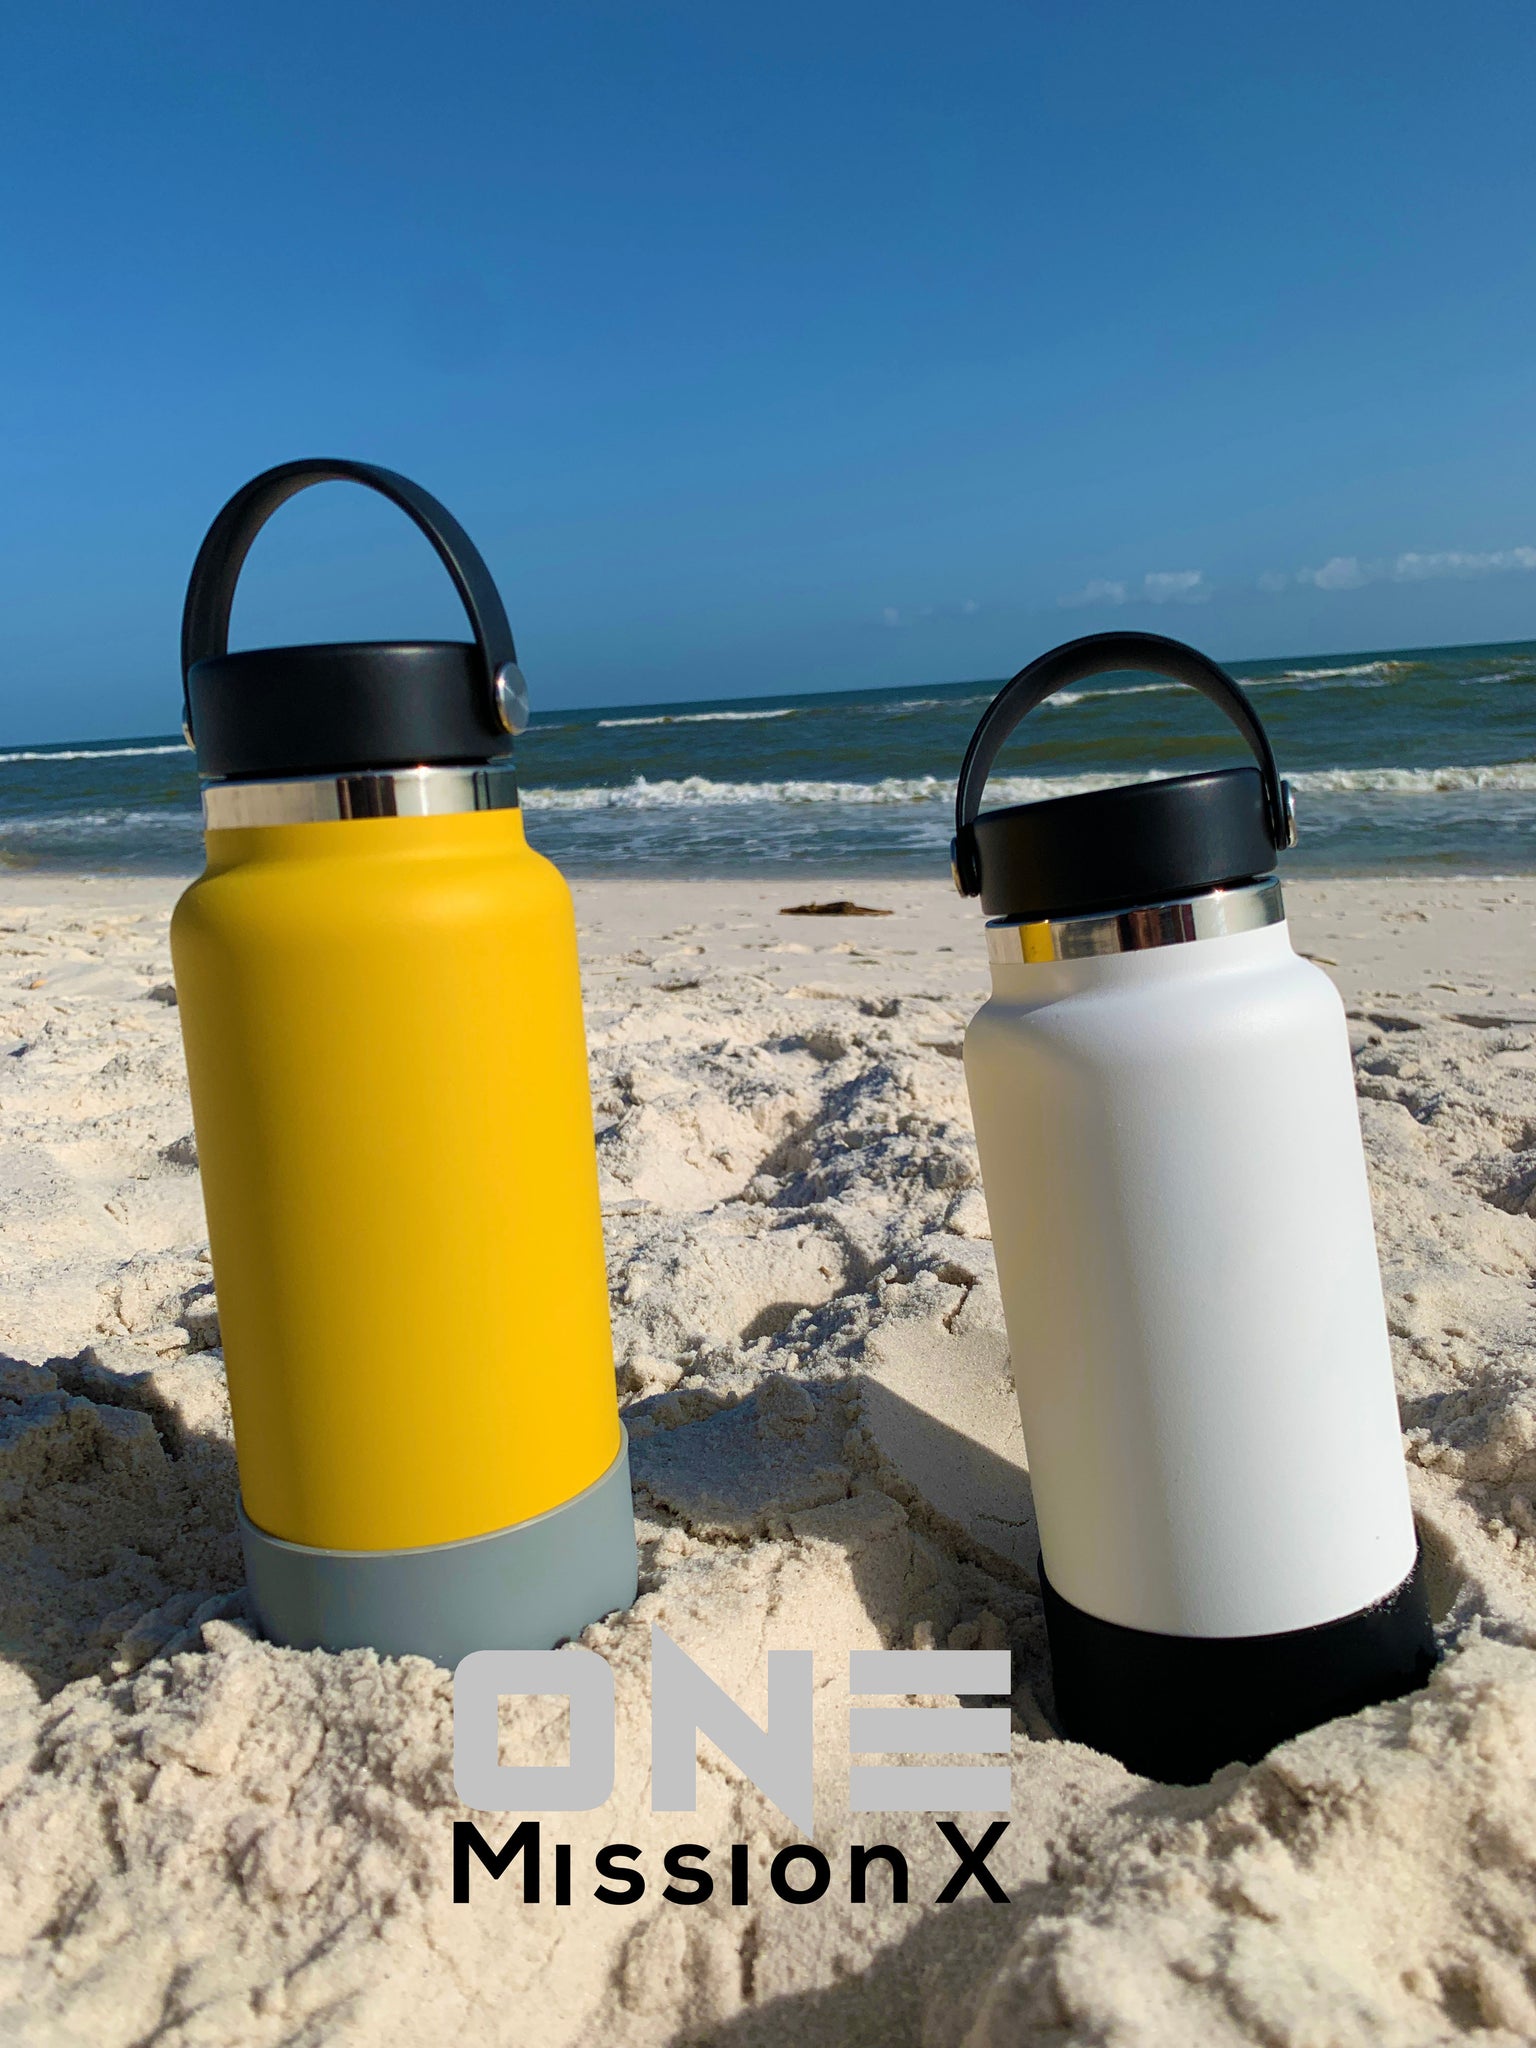 One MissionX Protective Boot Sleeve for Hydro Flask - Stanley Quencher and  IceFlow Tumblers - Also Compatible with Similar Stainless Steel Water  Bottles, BPA Free Silicone White Clear Fits 12 to 24 oz Bottles